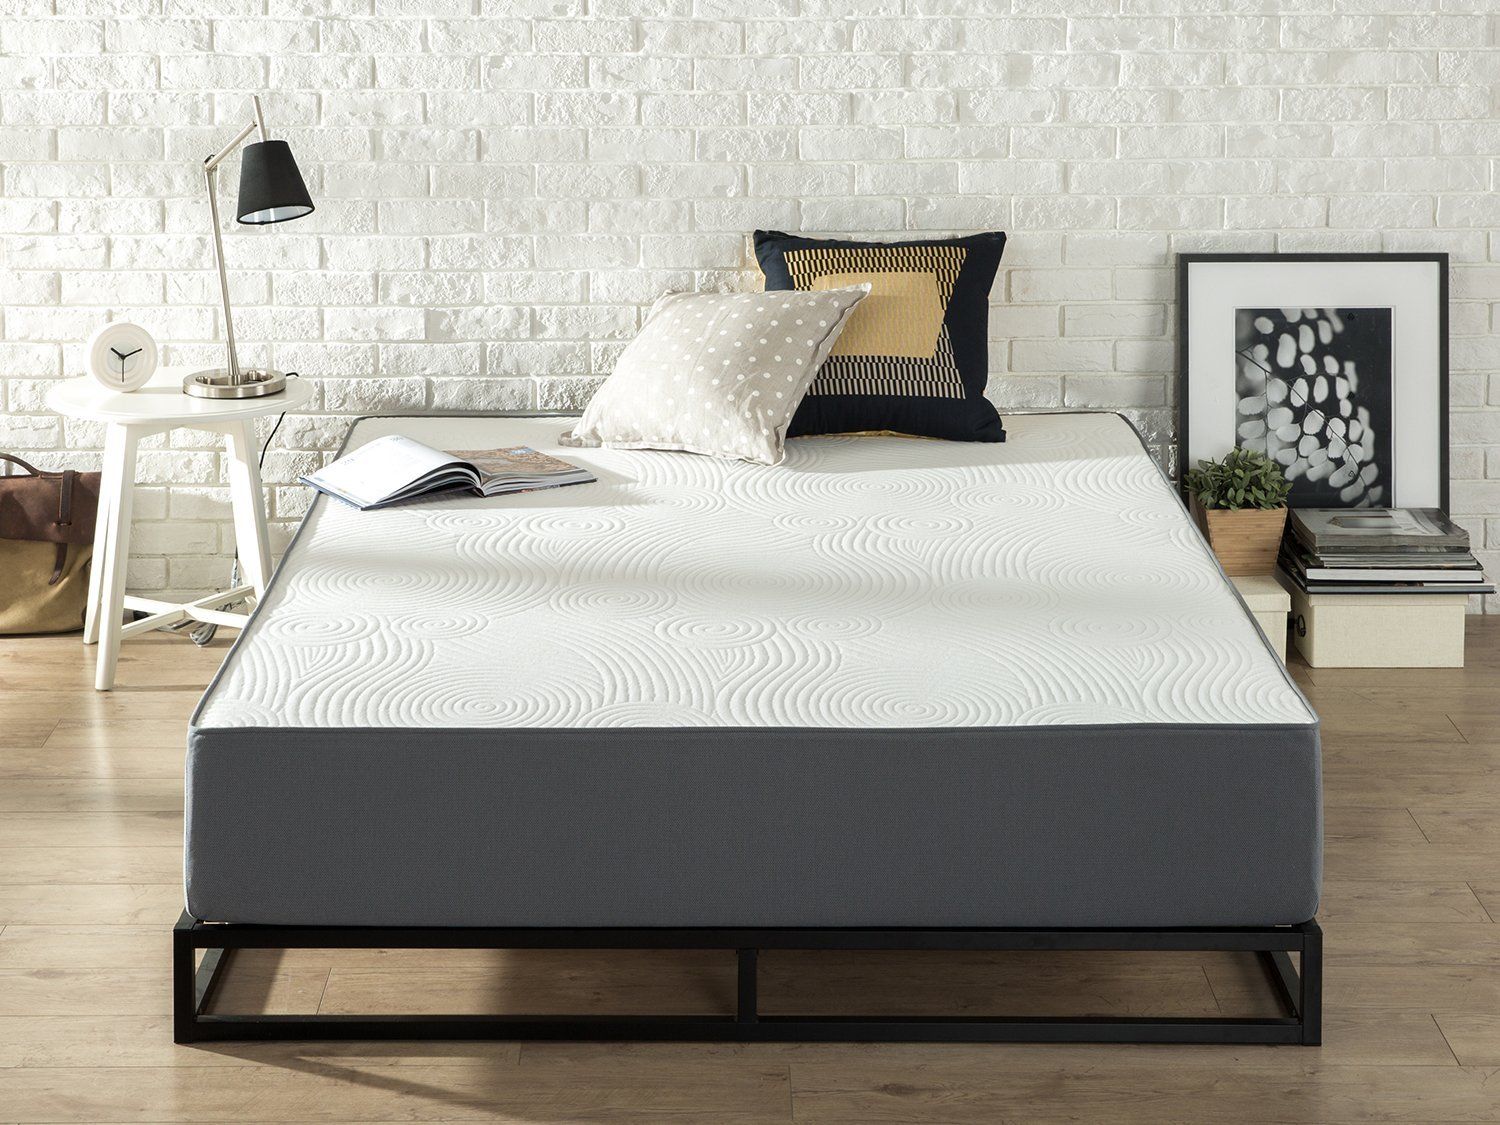 Best Firm Mattresses 2020 ReviewThis